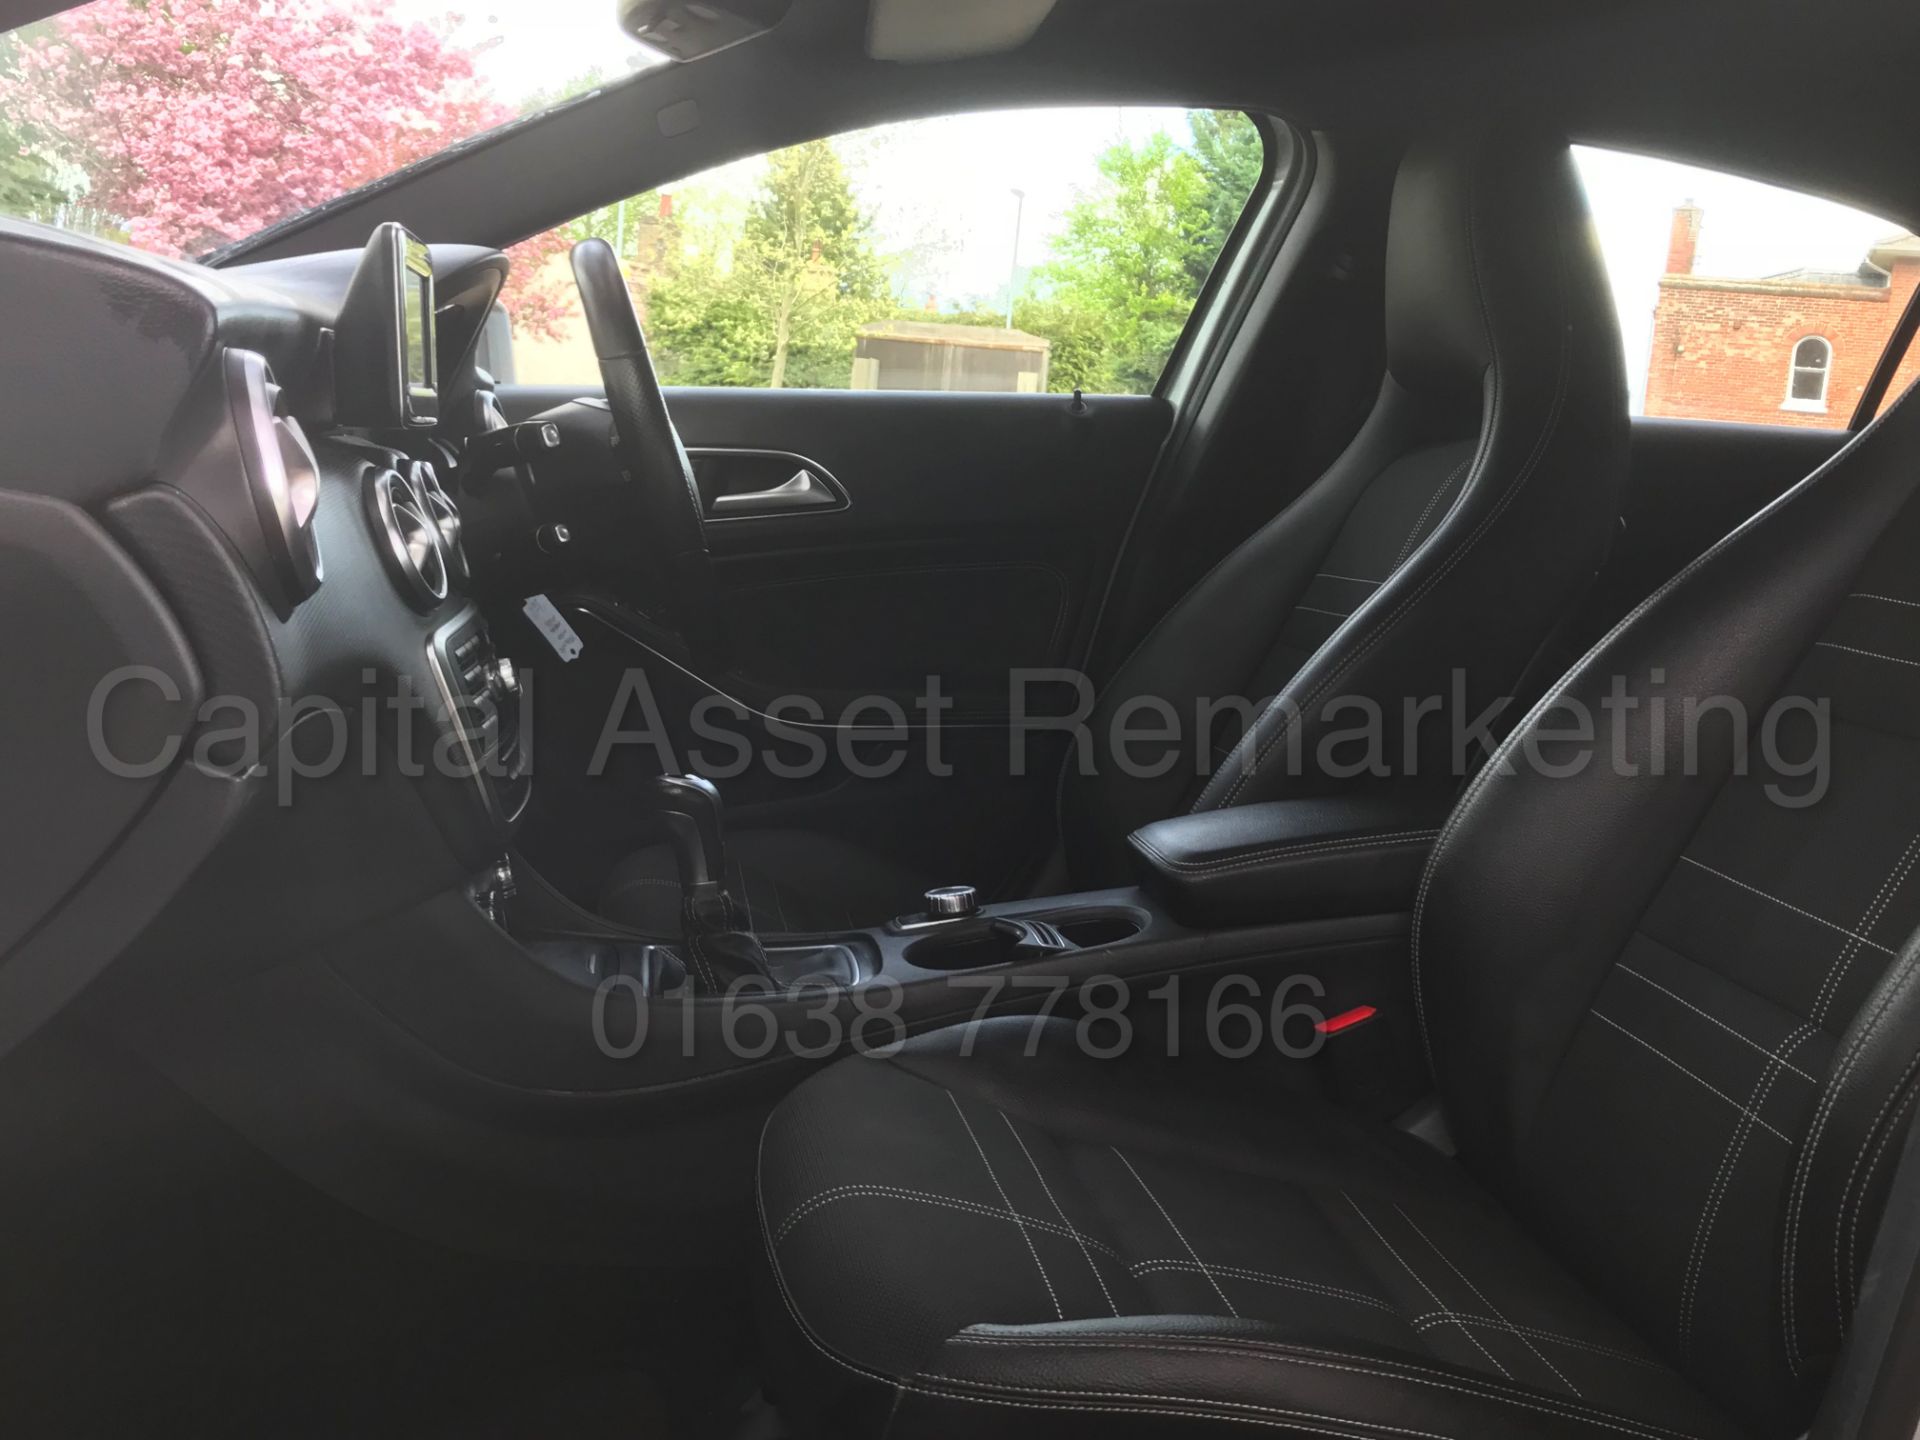 (On Sale) MERCEDES-BENZ A180 CDI 'SPORT EDITION' (2015) 'LEATHER - SAT NAV - STOP/START' (1 OWNER) - Image 18 of 36